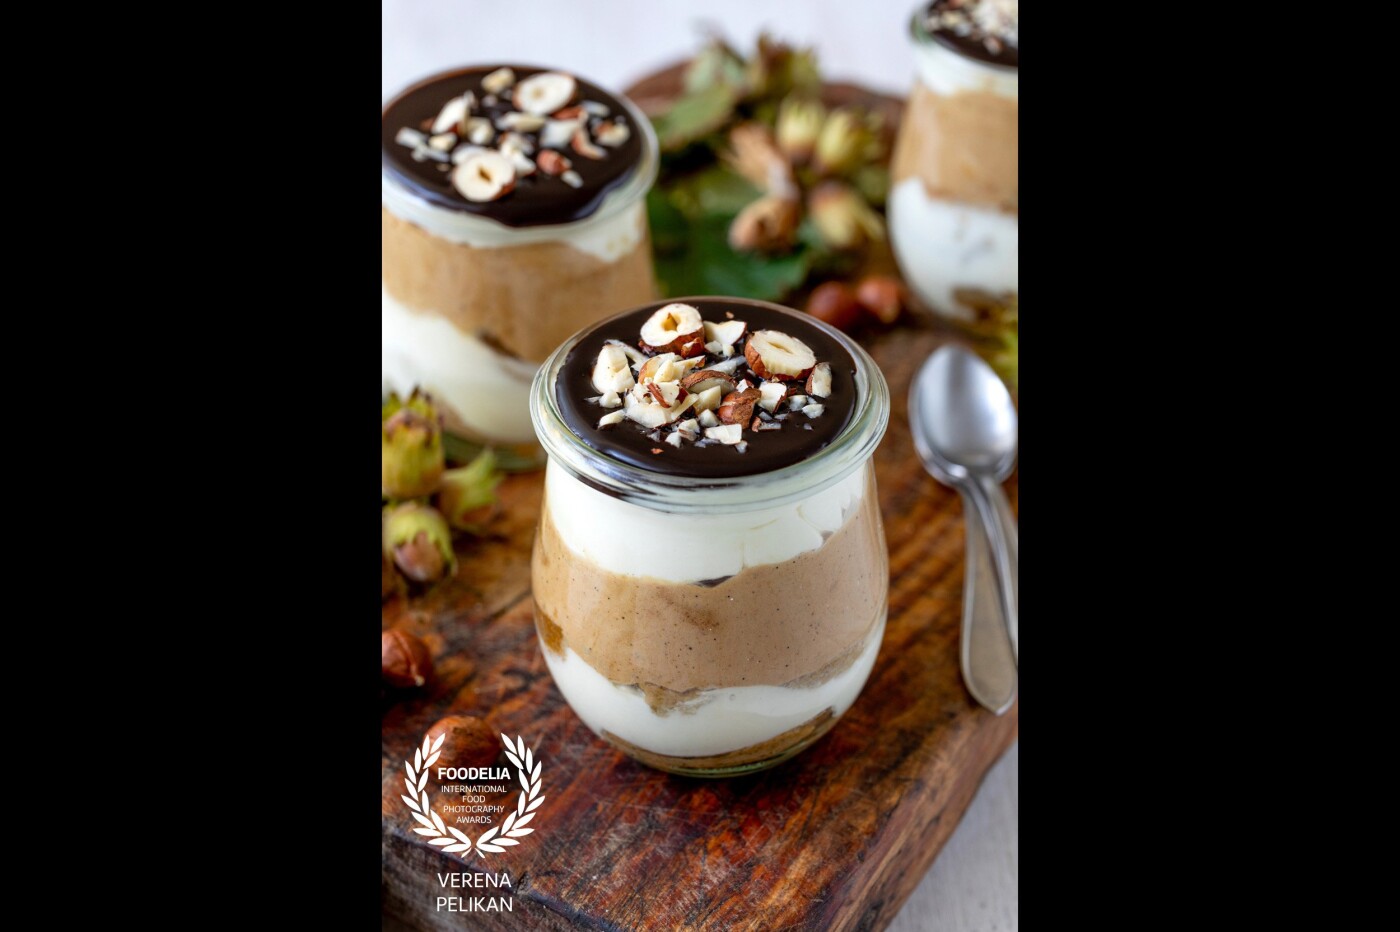 This classic Italian dessert takes a delicious twist! This Hazelnut Tiramisu is the perfect way to celebrate the holidays...or any day! Recipe and further pictures can be found on my website https://www.sweetsandlifestyle.com/haselnuss-tiramisu/